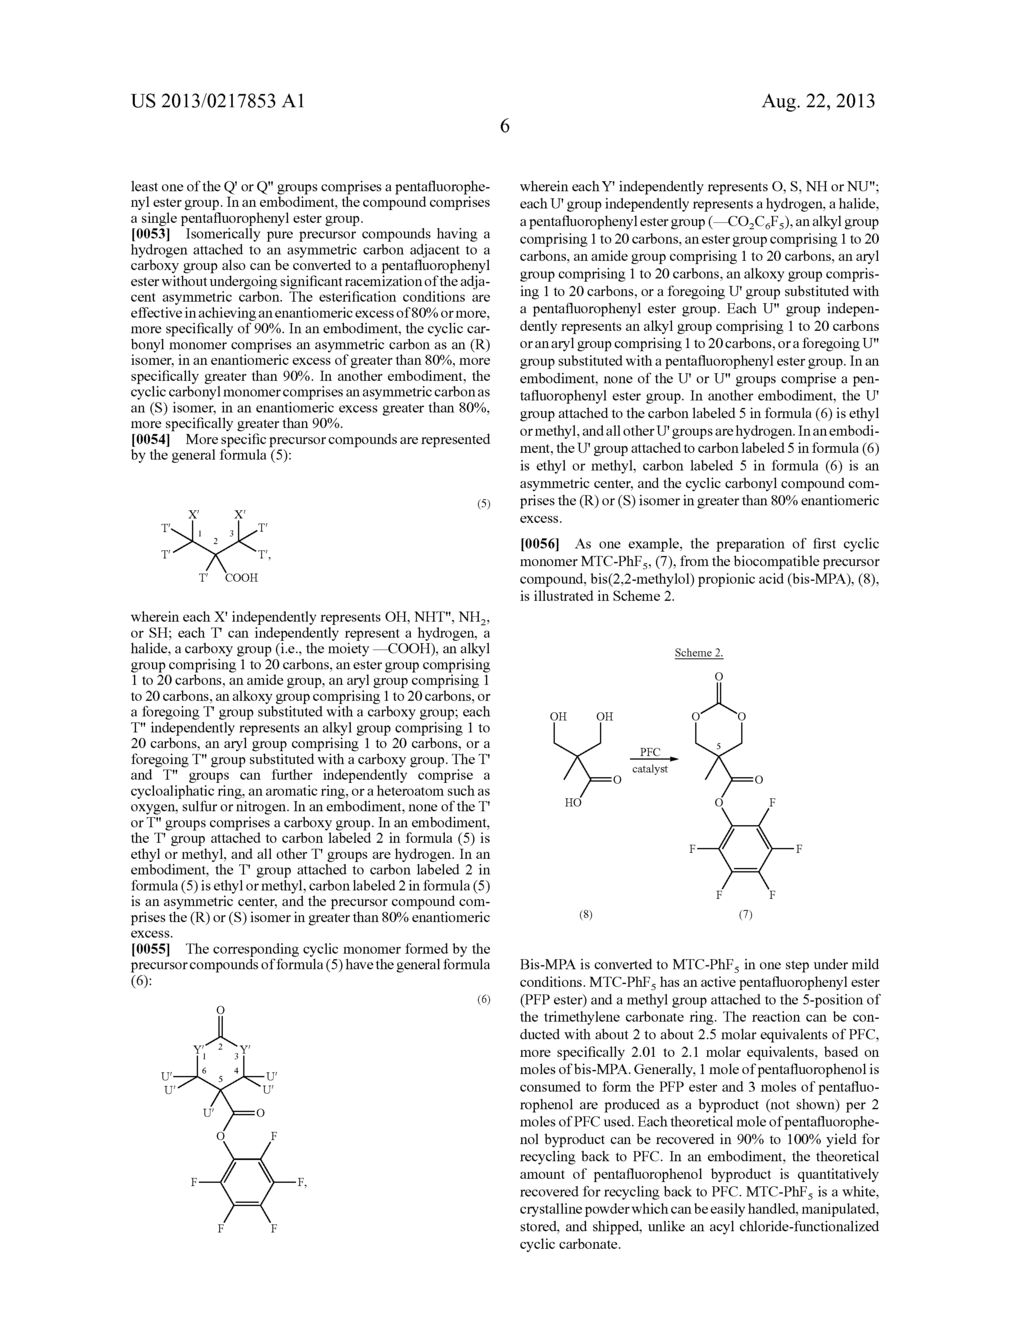 POLYMERS BEARING PENDANT PENTAFLUOROPHENYL ESTER GROUPS, AND METHODS OF     SYNTHESIS AND FUNCTIONALIZATION THEREOF - diagram, schematic, and image 21